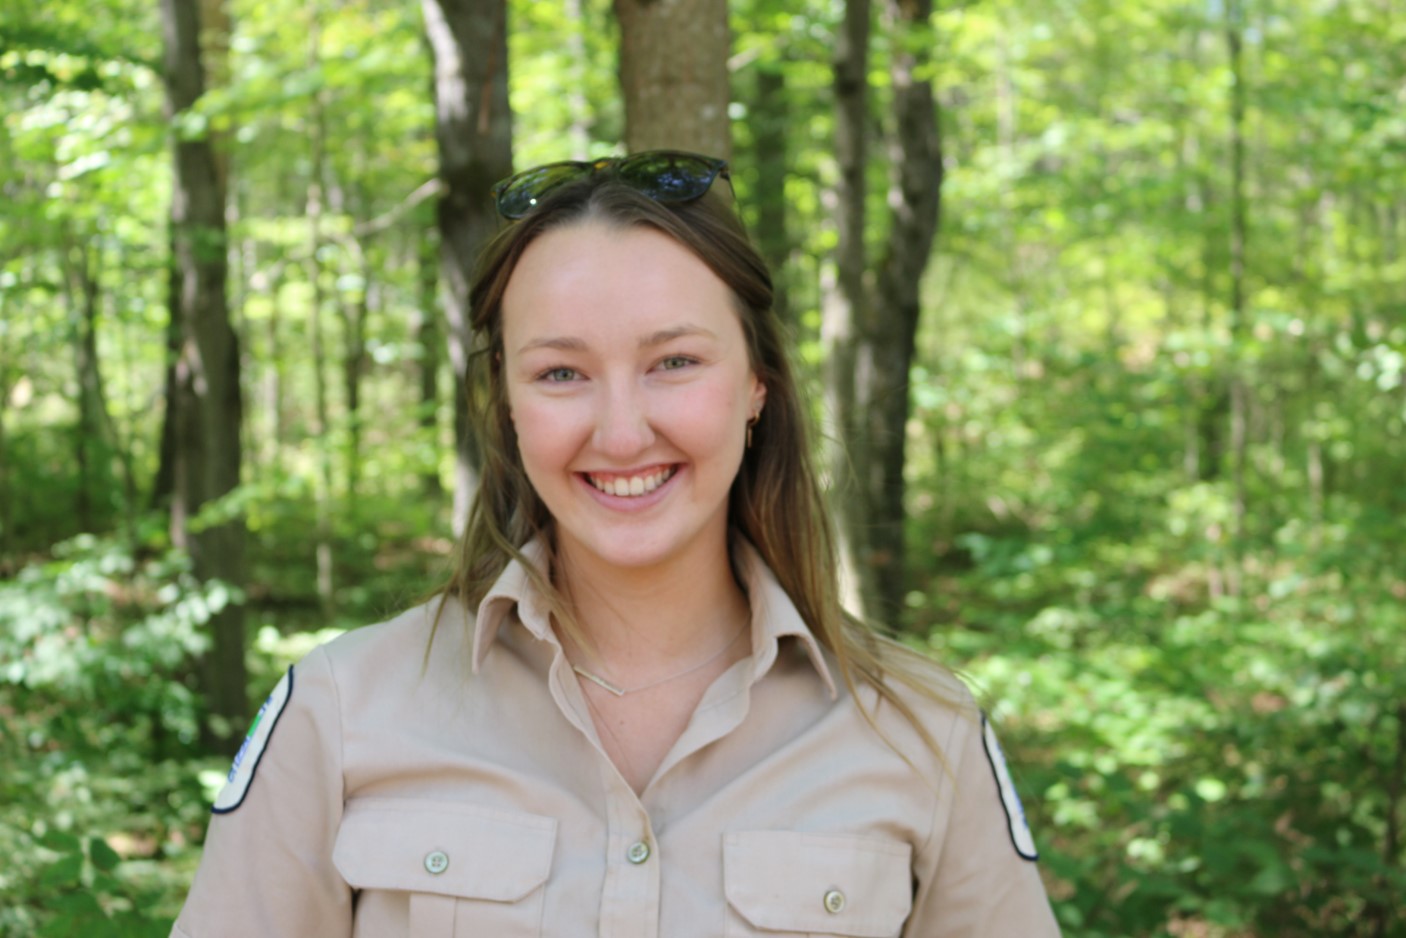 Woman in Ontario Parks uniform smiling